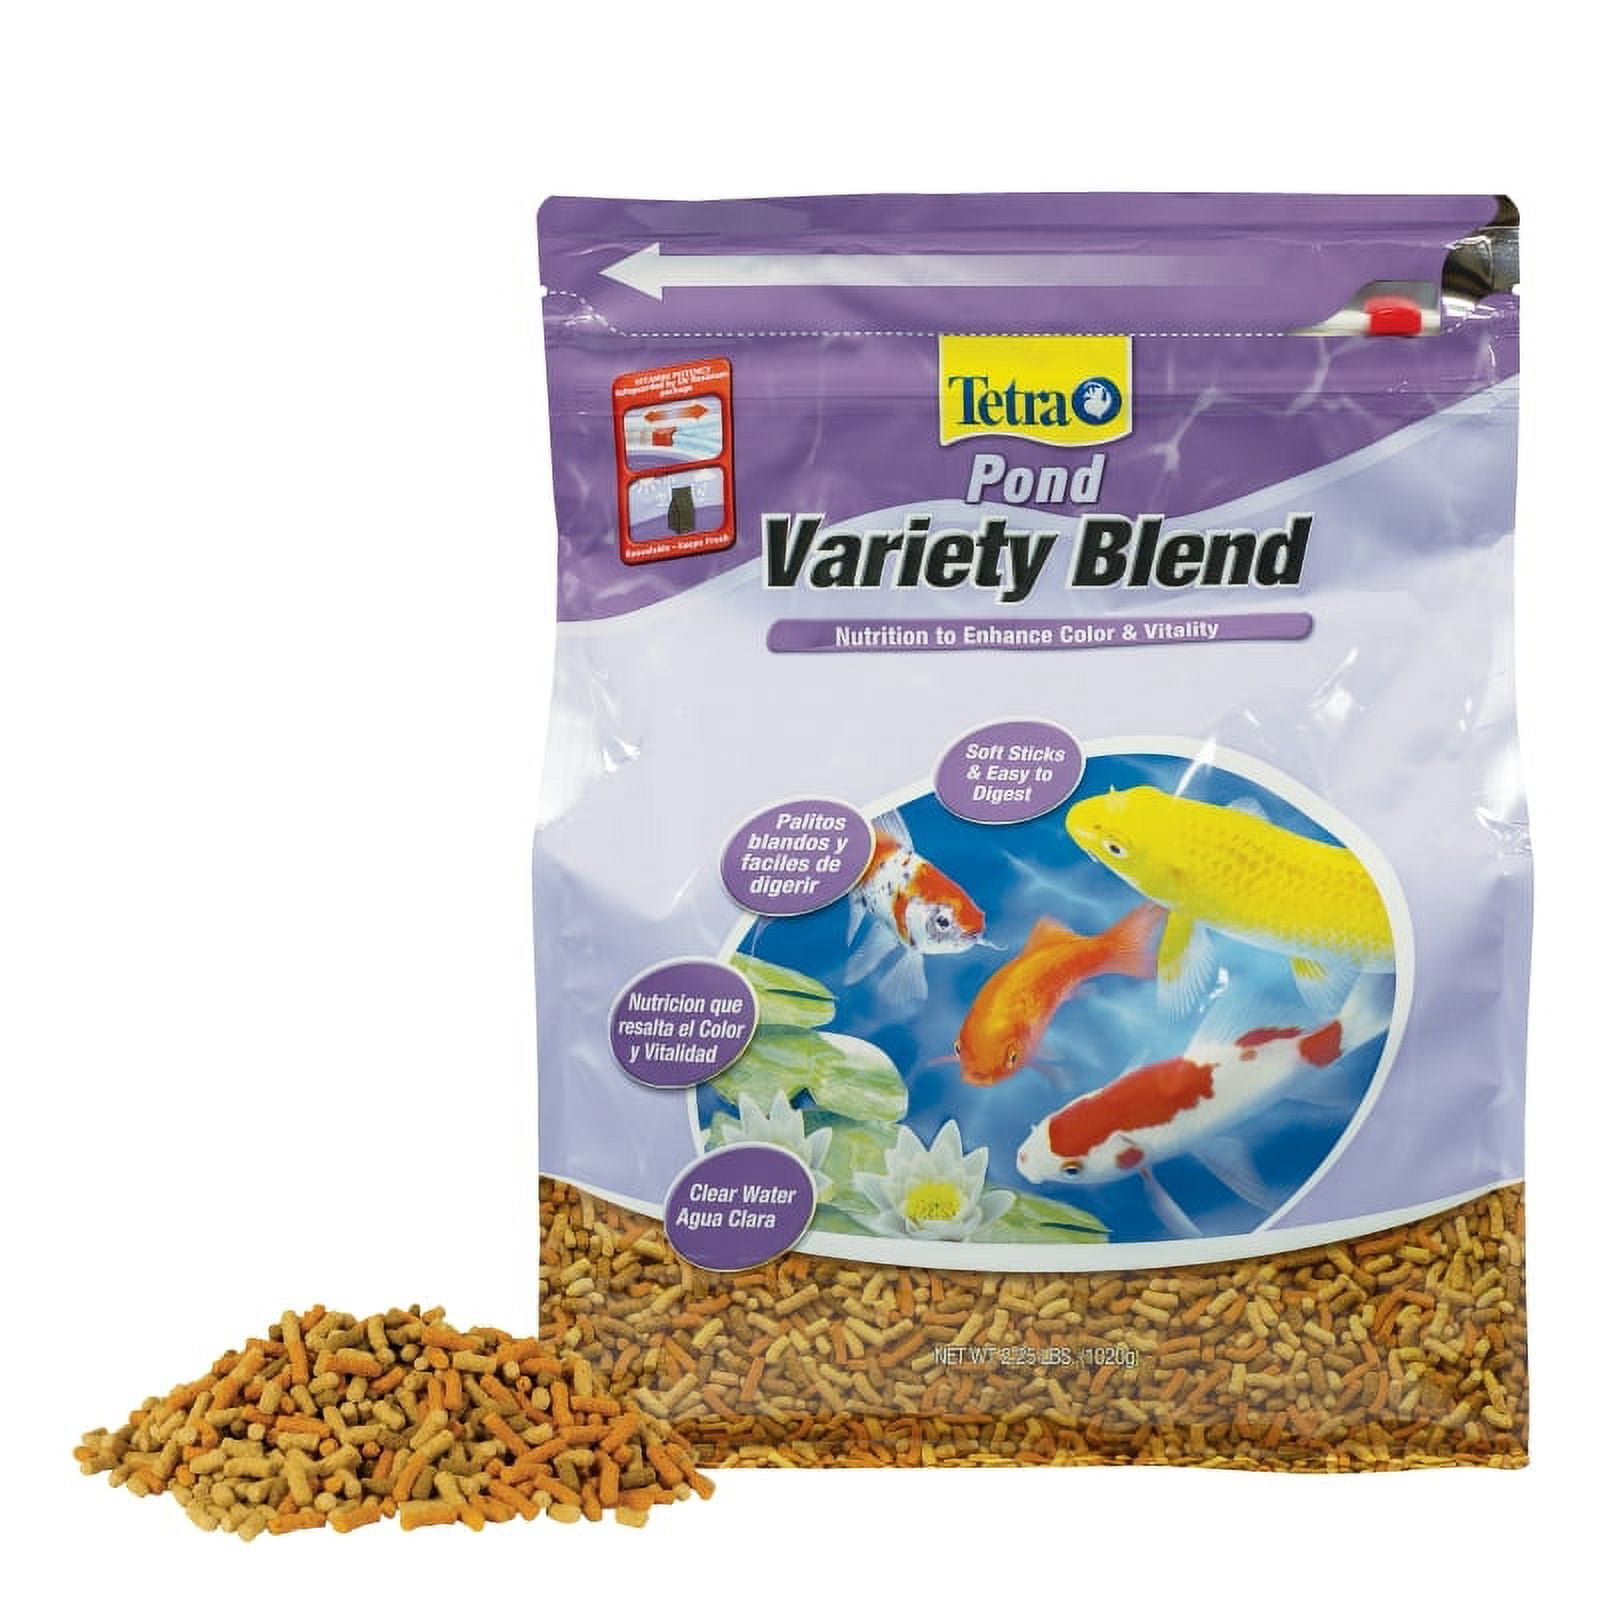 🇹🇿Marybul Tropical Fish Store on Instagram: 🔥🔥🔥 170Grams Tetra Pond  Multi Mix for Tzs 45,ooo/- Brand: Tetra (German based) Weight: 170Grams  Complete food mix comprising four food types that meet the needs